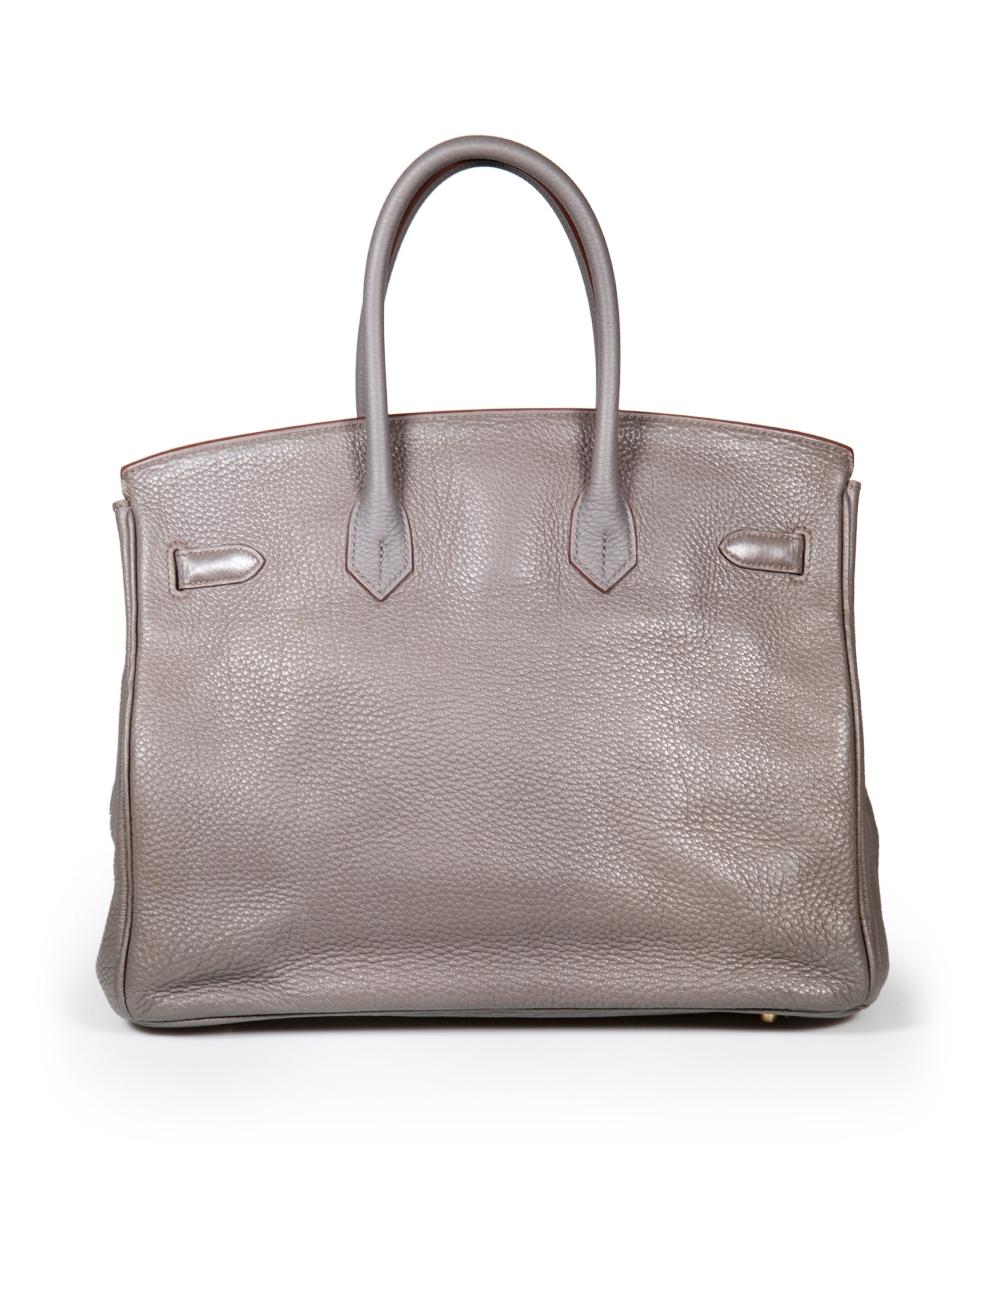 Hermès 2012 Grey Leather Birkin 35 Etain Togo GHW P Stamp In Good Condition For Sale In London, GB